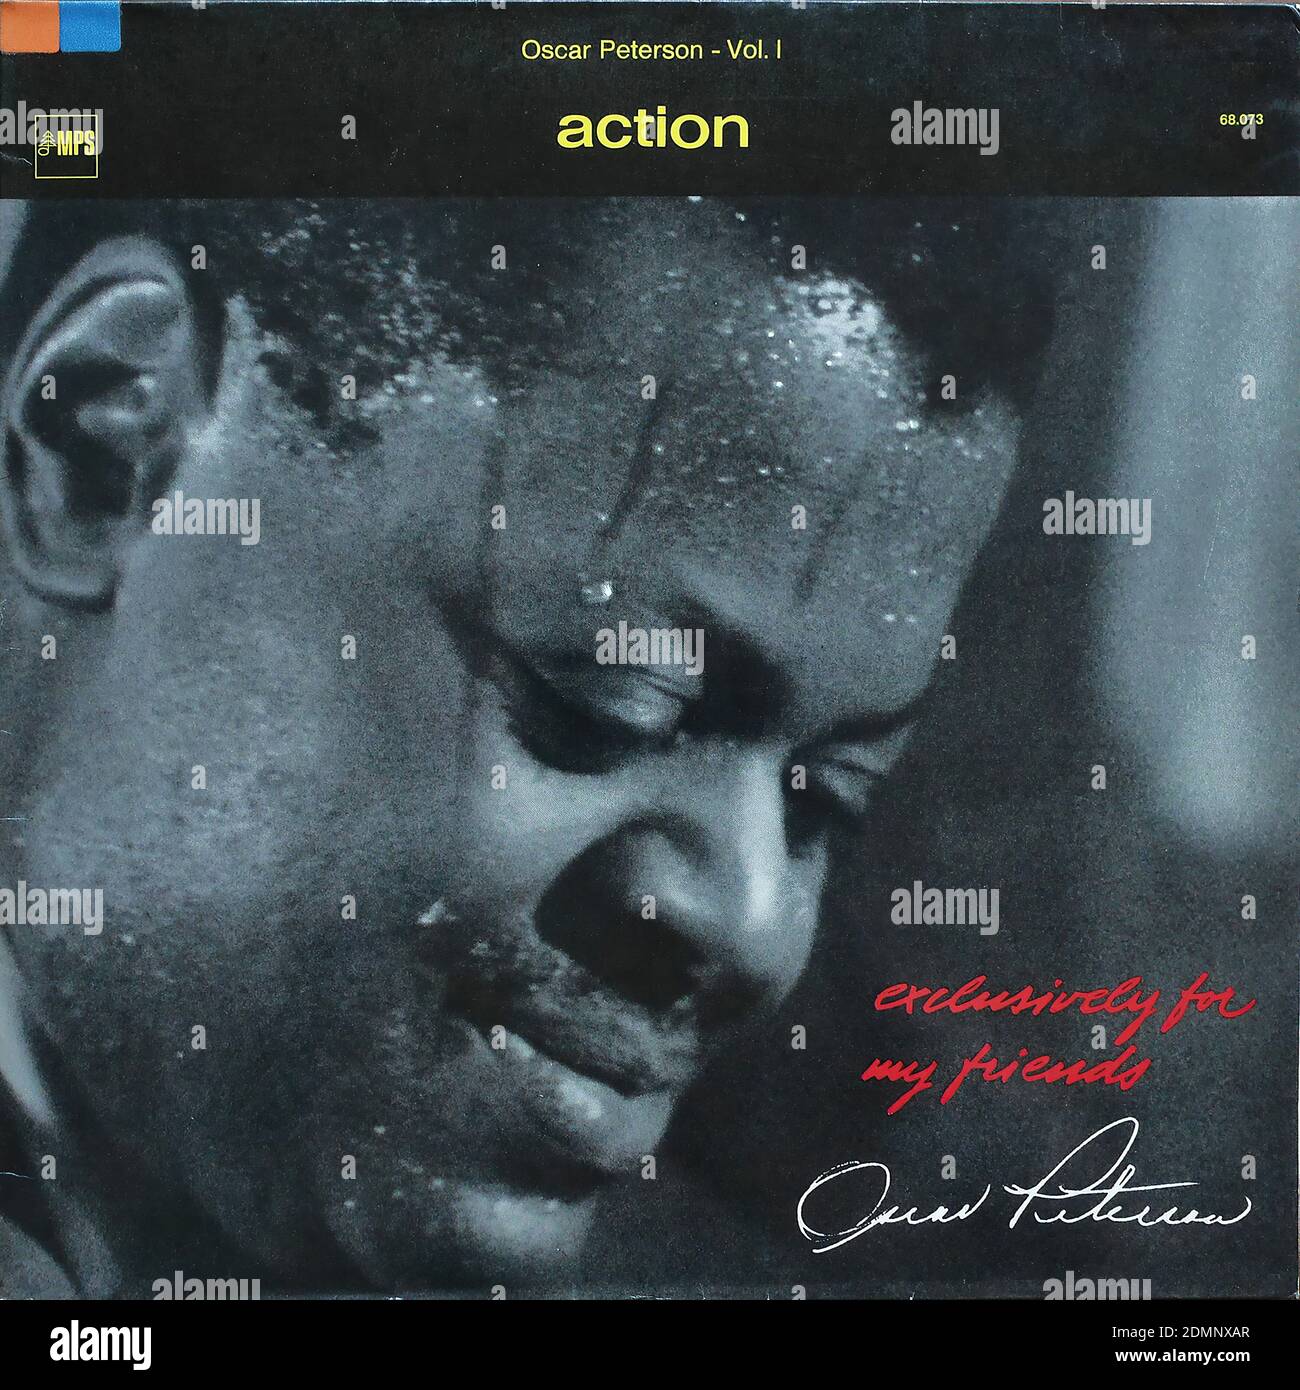 Oscar Peterson Vol.1 - Action, with Ray Brown Bass, Ed Thigpen Drums, MPS 68.073, Exclusively for my friends, 1968  - Vintage vinyl album cover Stock Photo